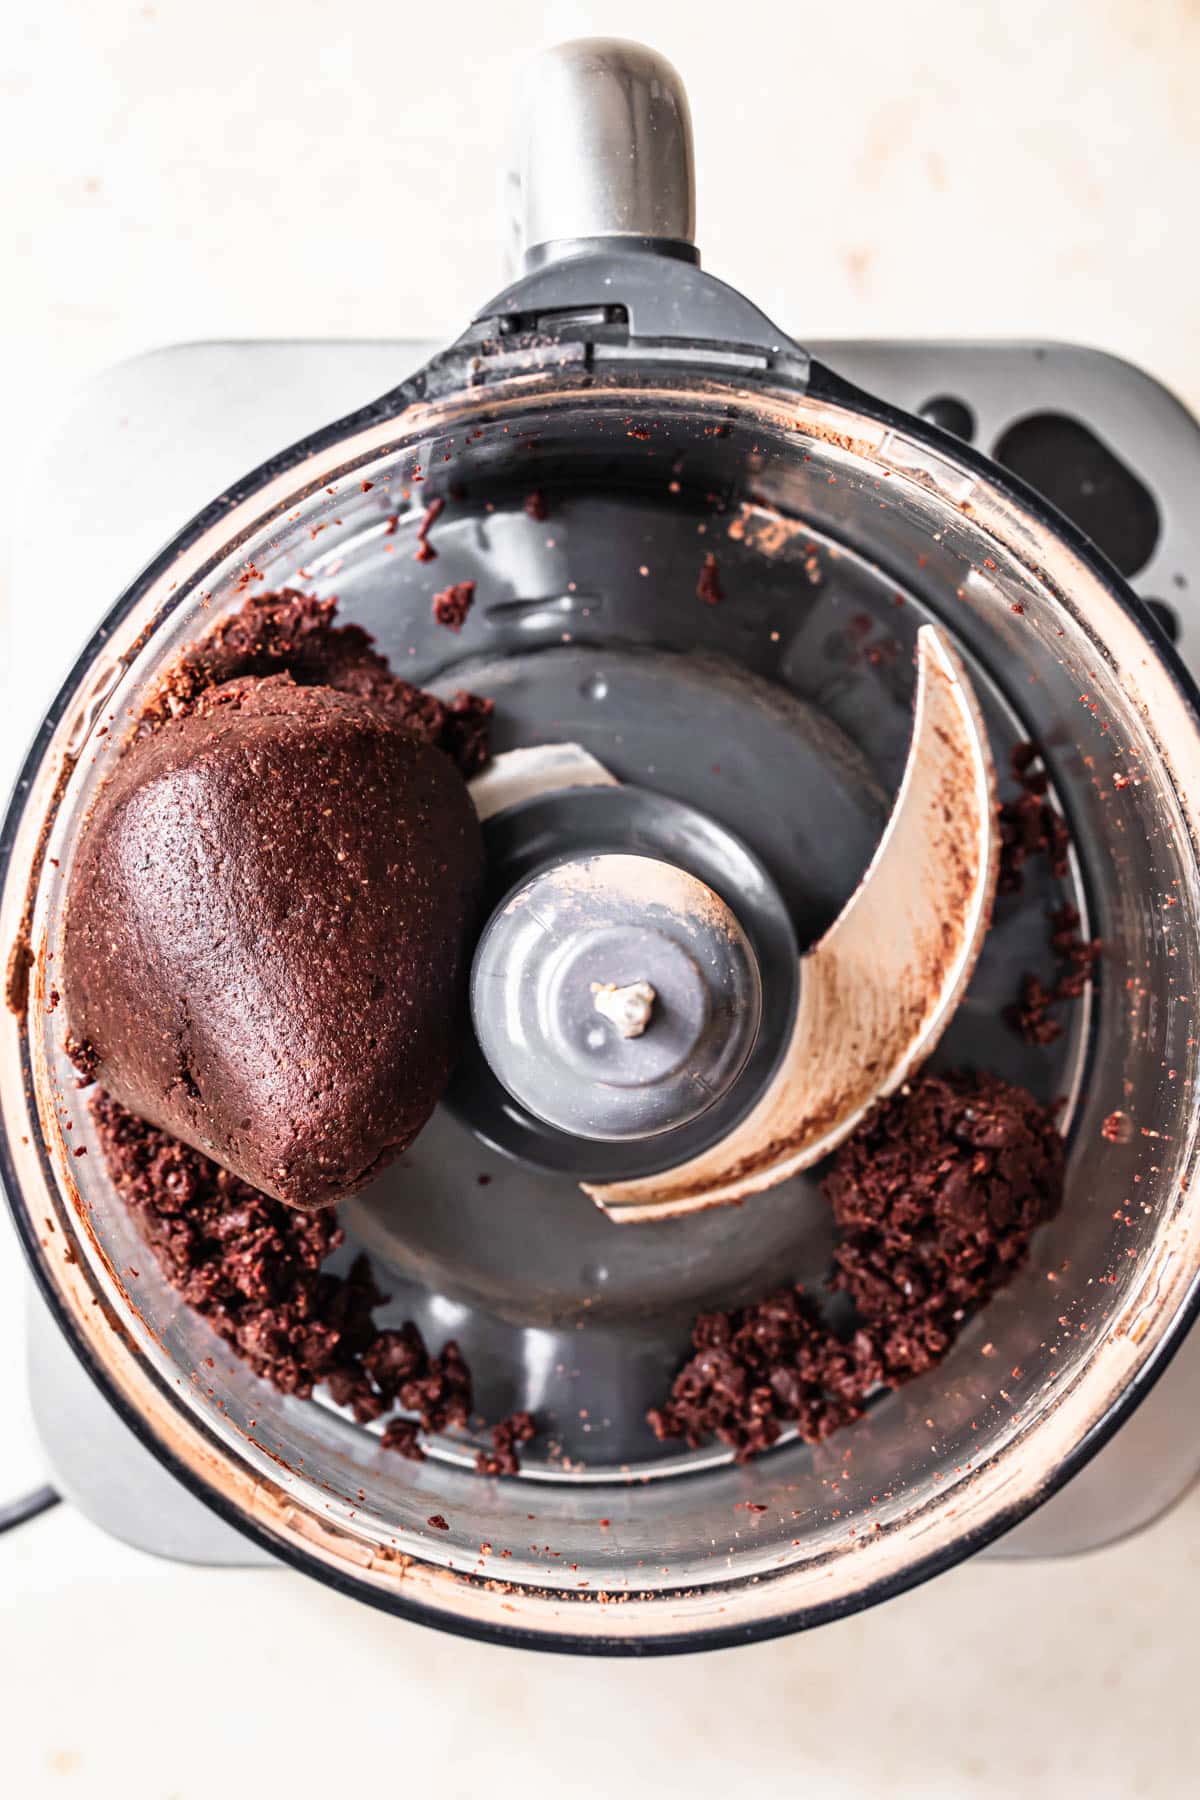 Gluten free rum ball mixture blended together in a food processor.